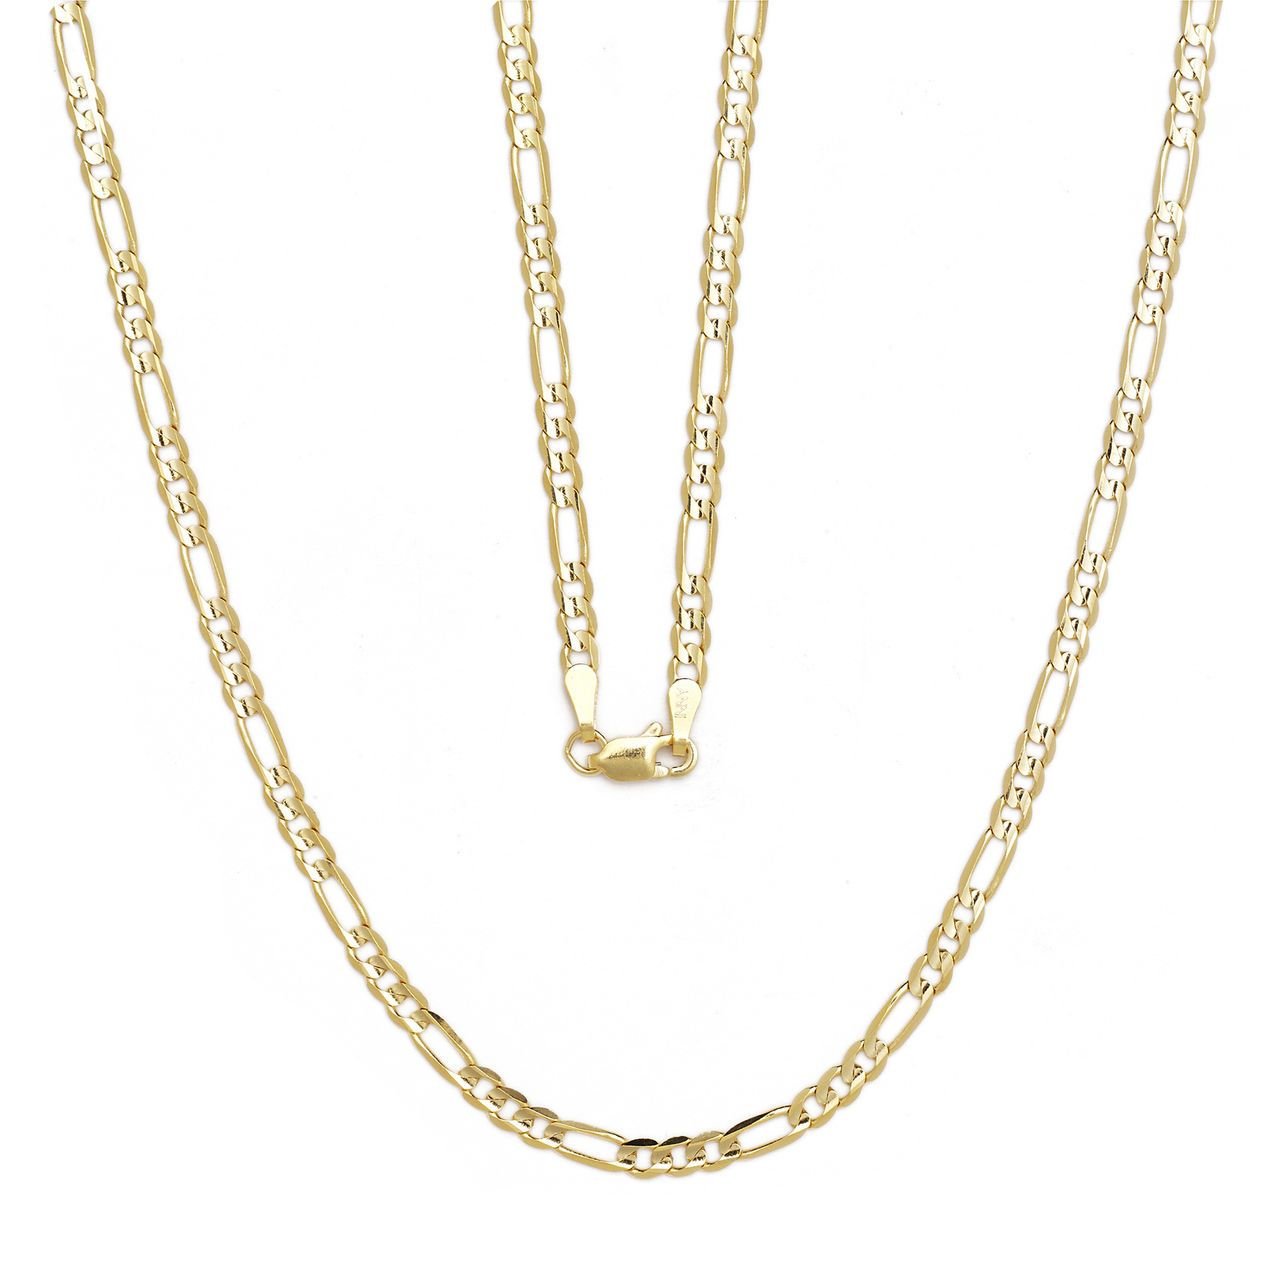 10k Fine Gold Figaro Chain Necklace with Concave Look, 0.13 Inch (3.2mm)